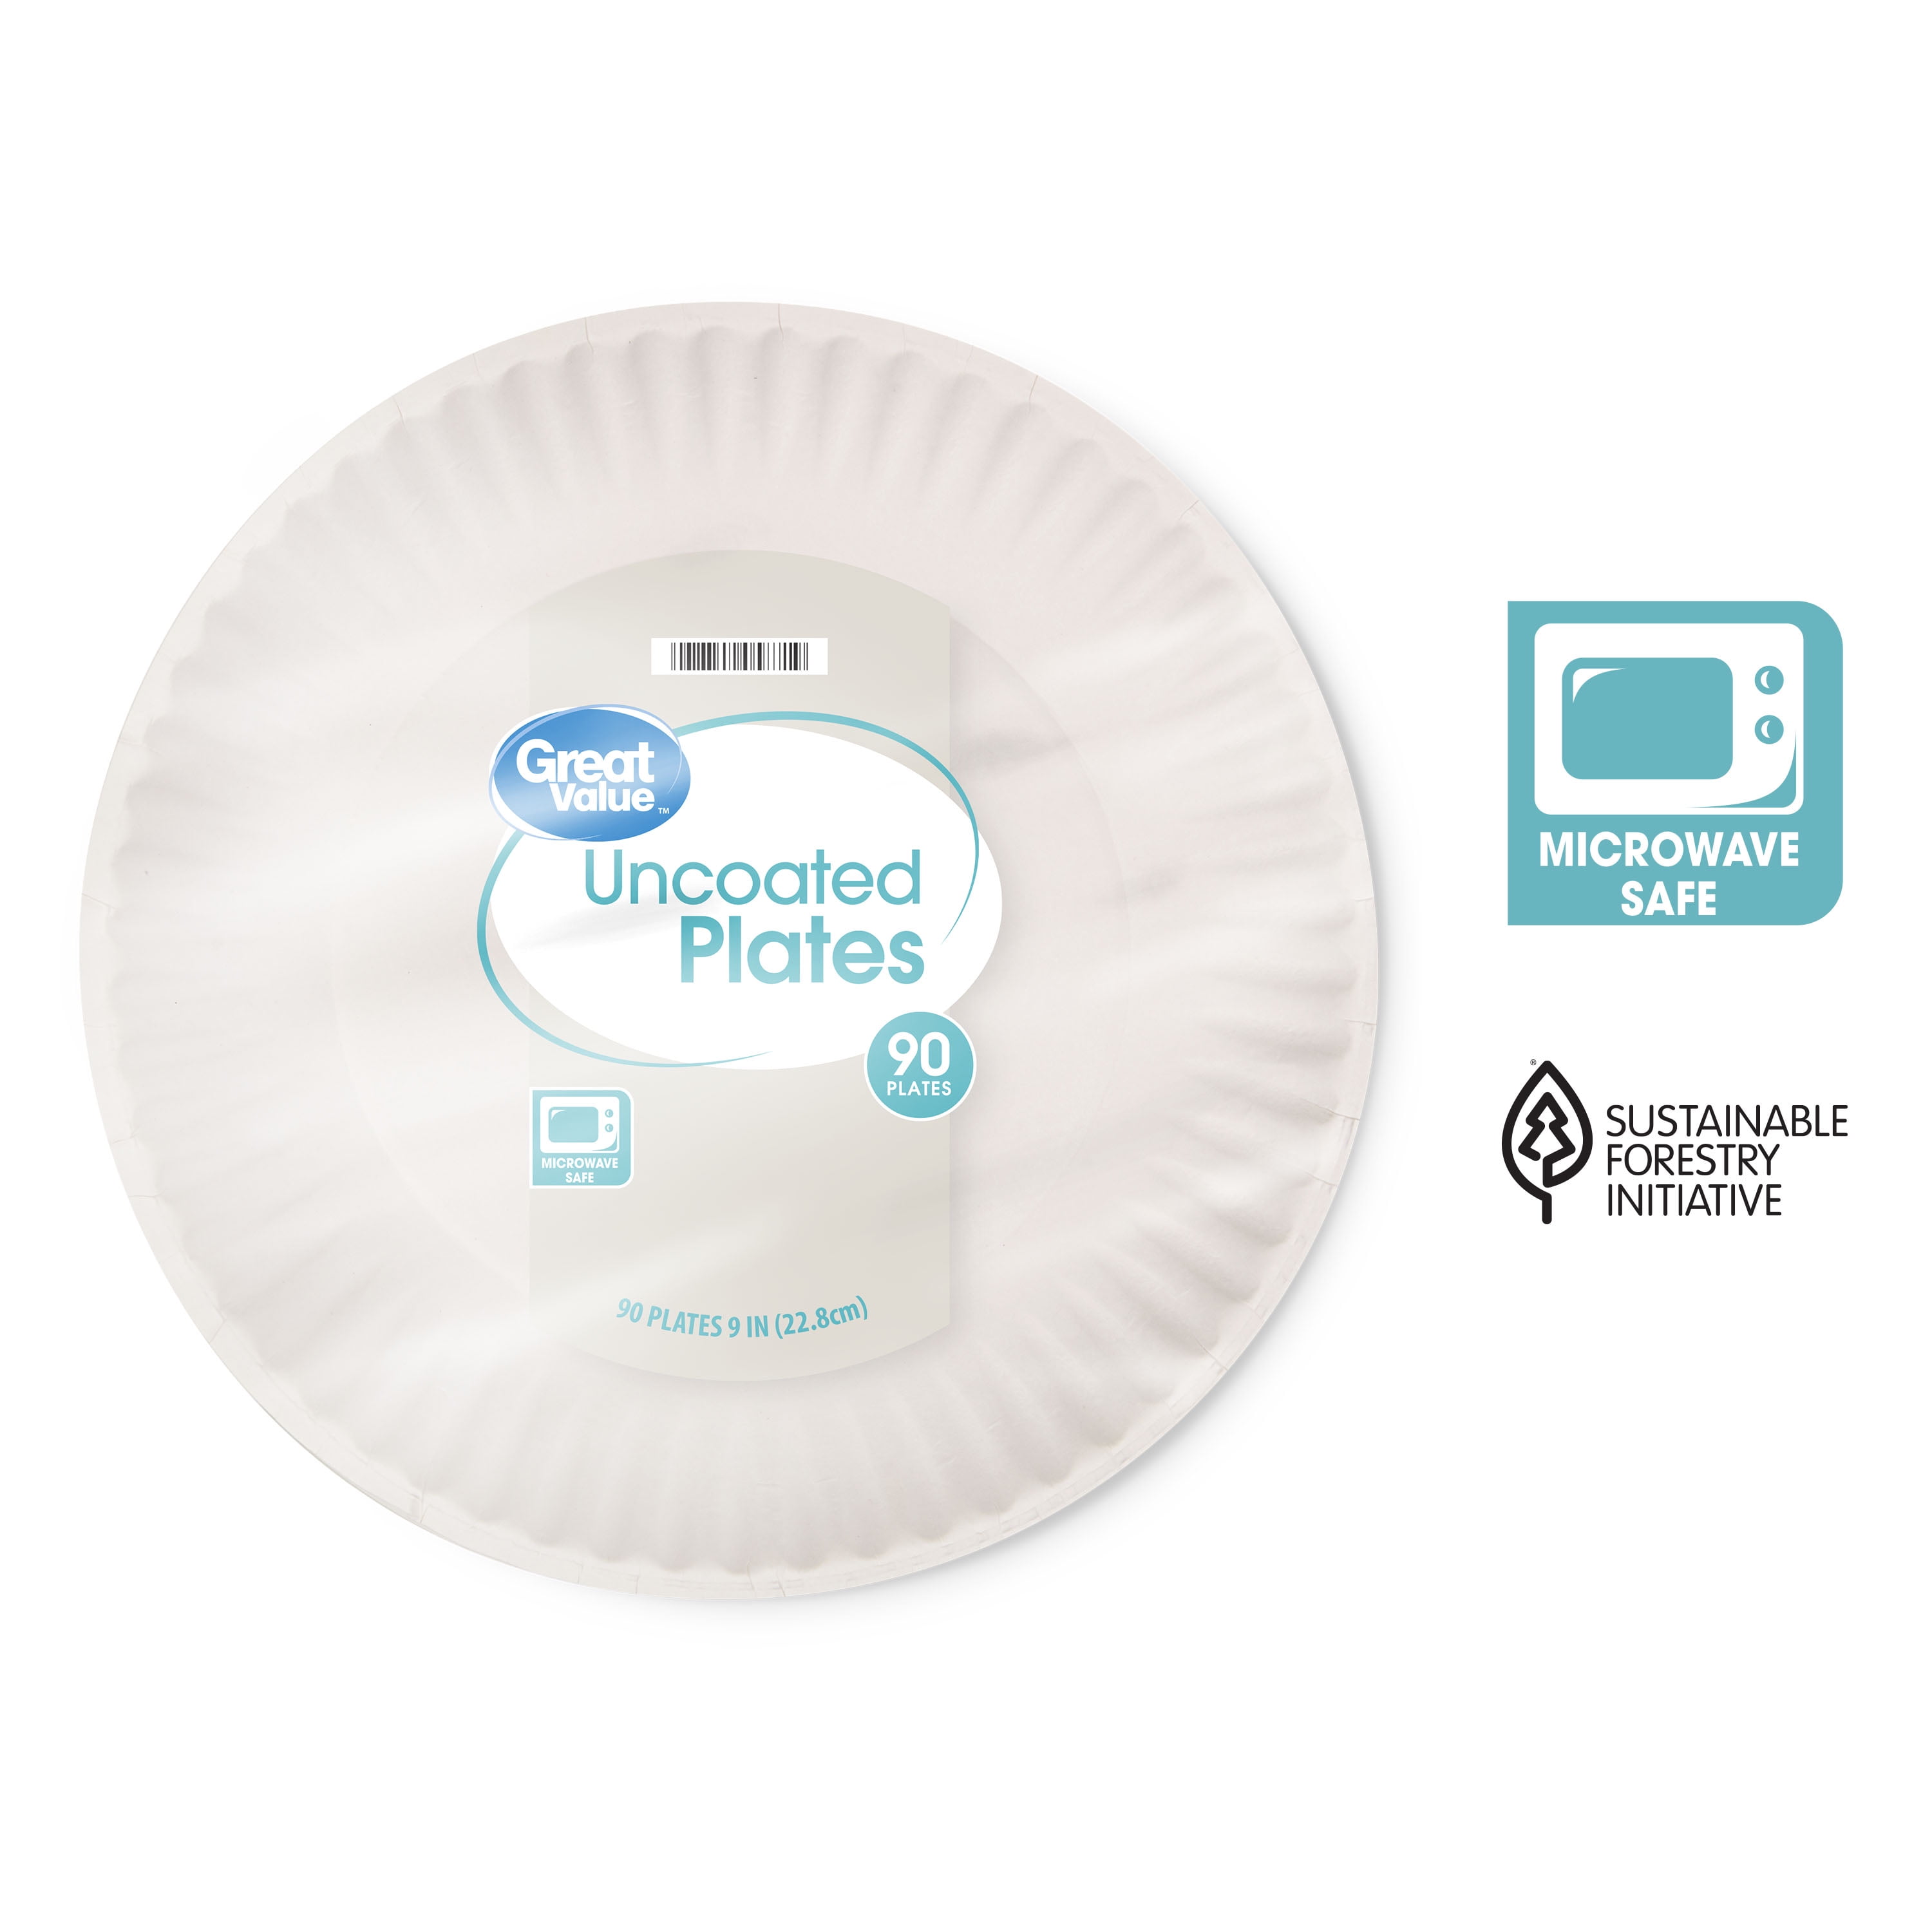  Empress Uncoated Paper Plate, 9 Inches, White, Pack of 100 -  1004997 : Sports & Outdoors